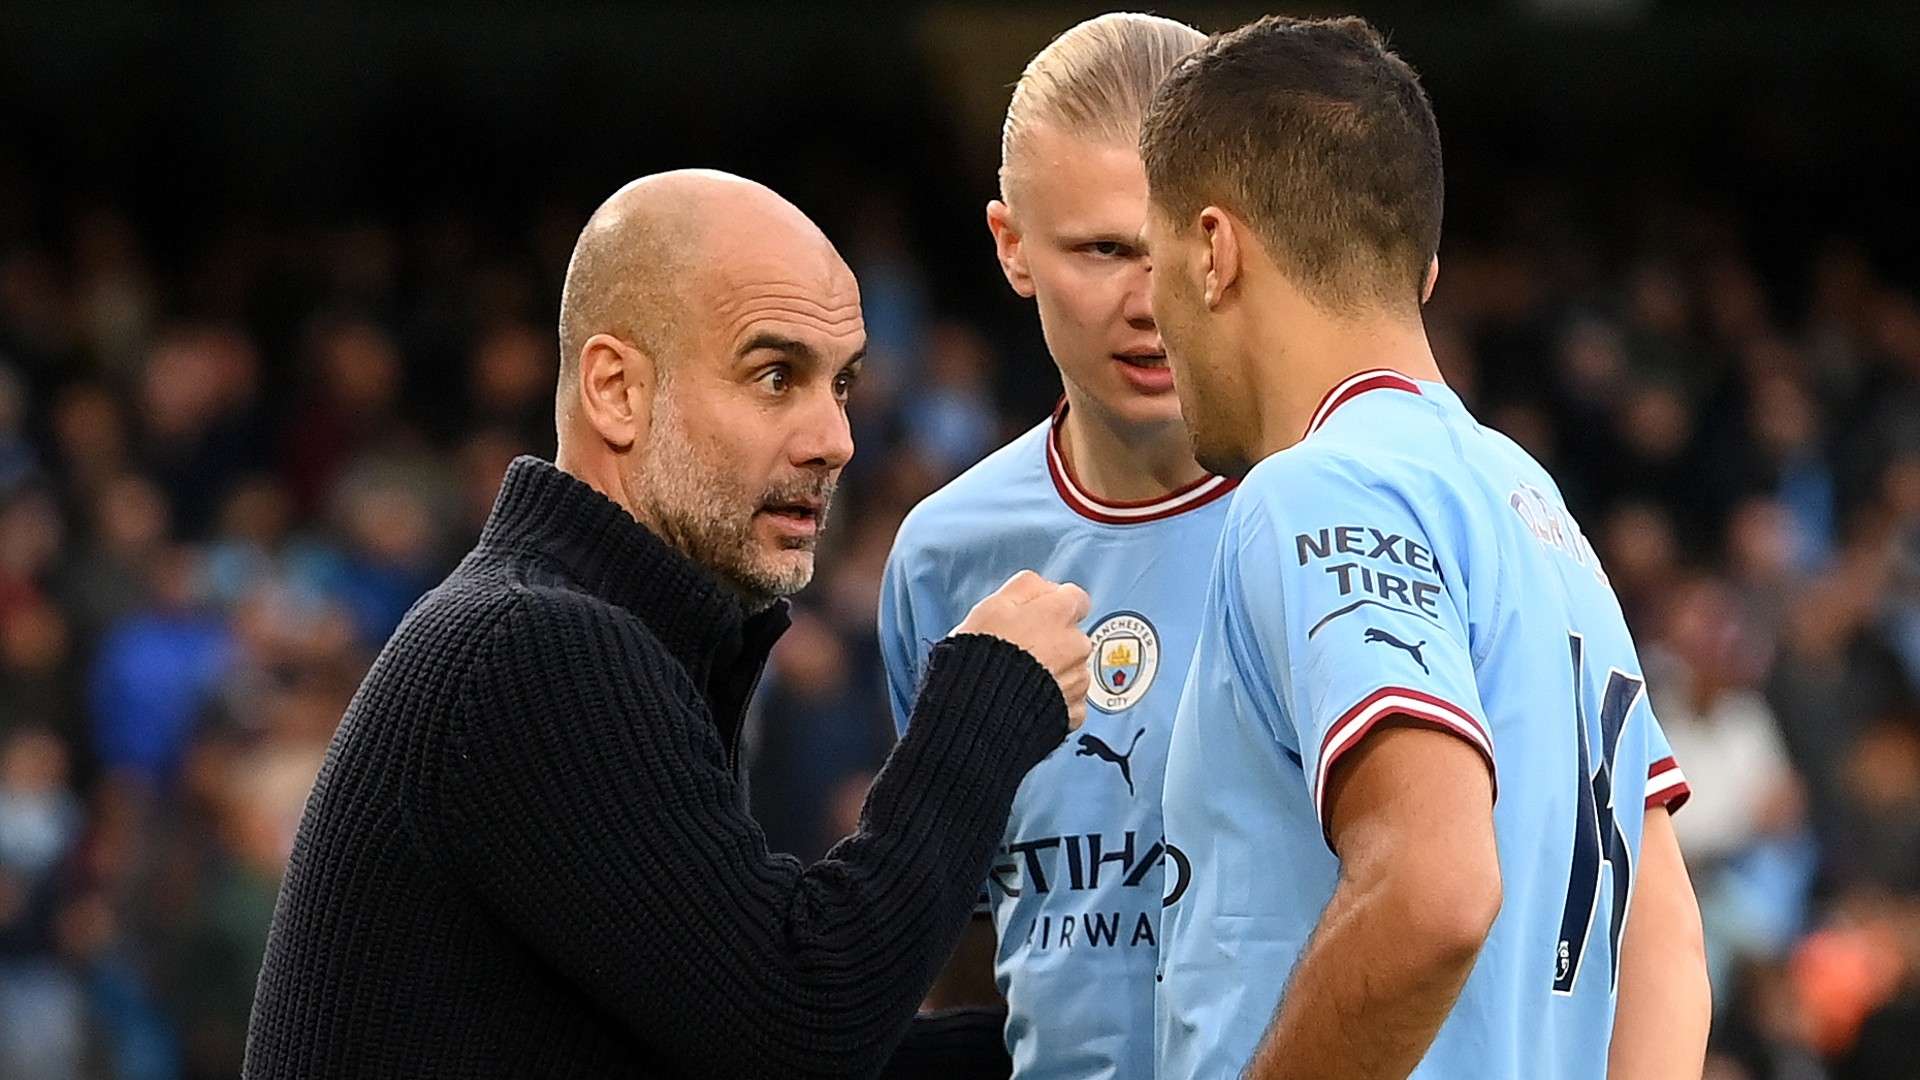 Pep Guardiola gives instructions to Erling Haaland and Rodri of Manchester City